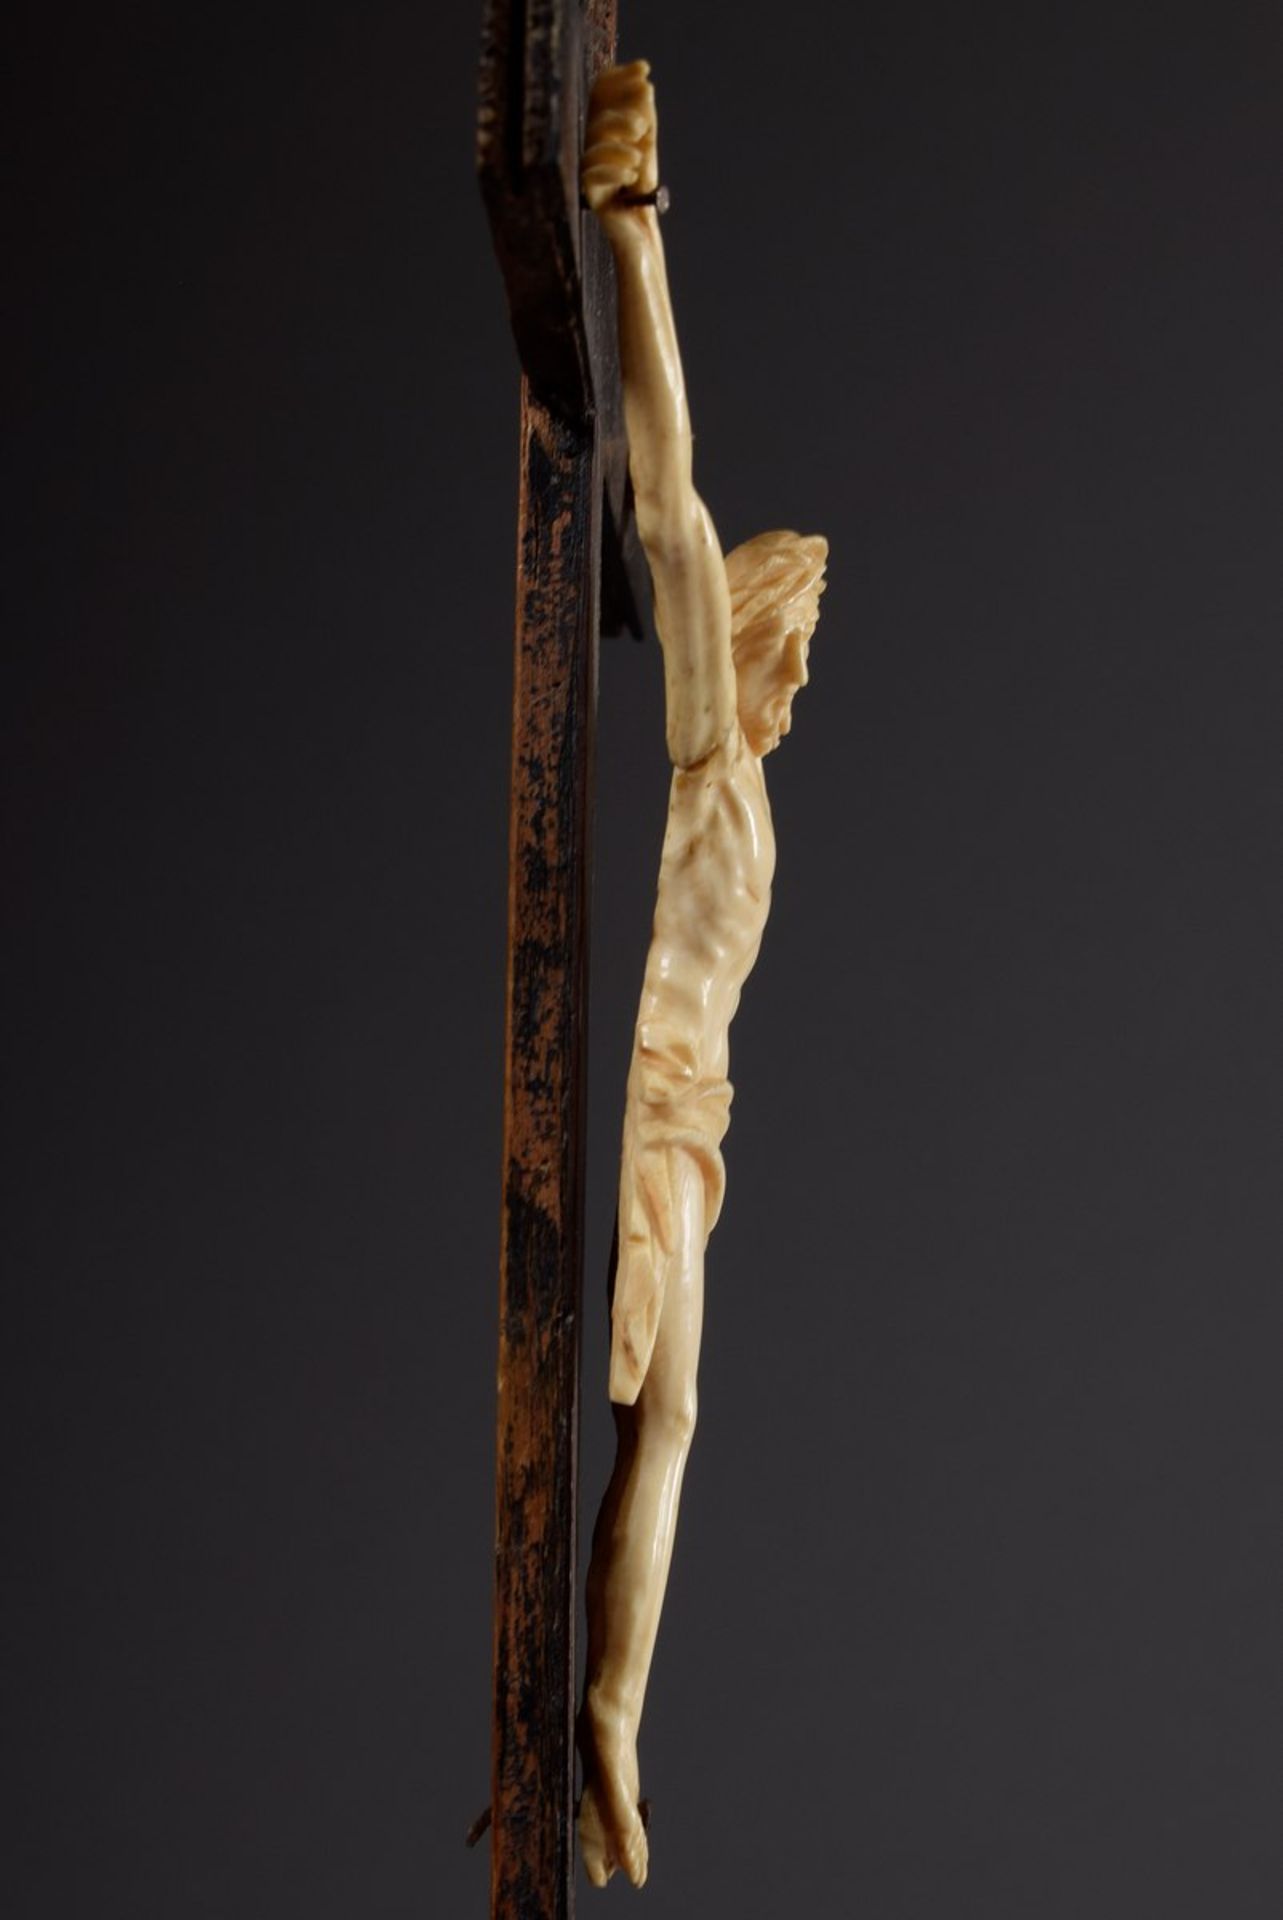 Ivory carving "Corpus Christi" (three-nail type) with the arms stretched far upwards and the head t - Image 5 of 5